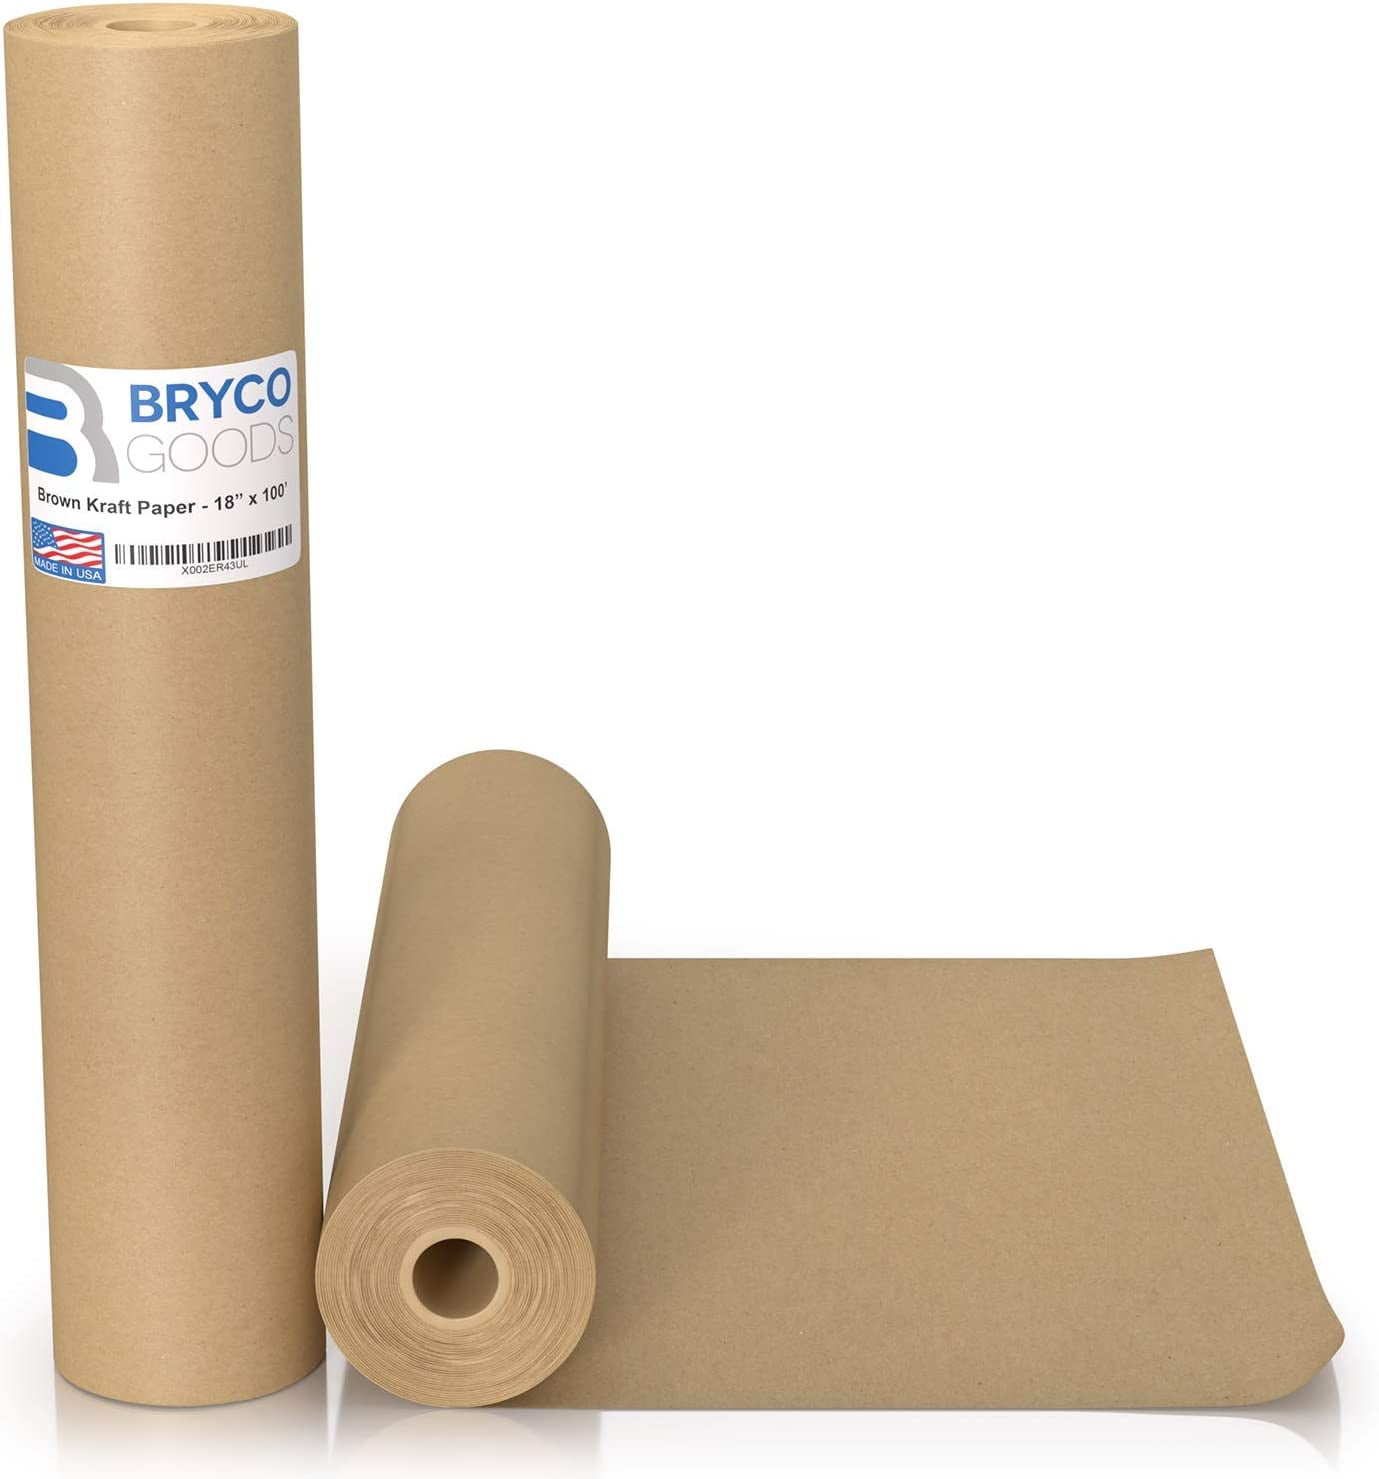 Custom Printed Promotional Products with Your Company Logo: Brown Butcher  Paper Kraft Roll